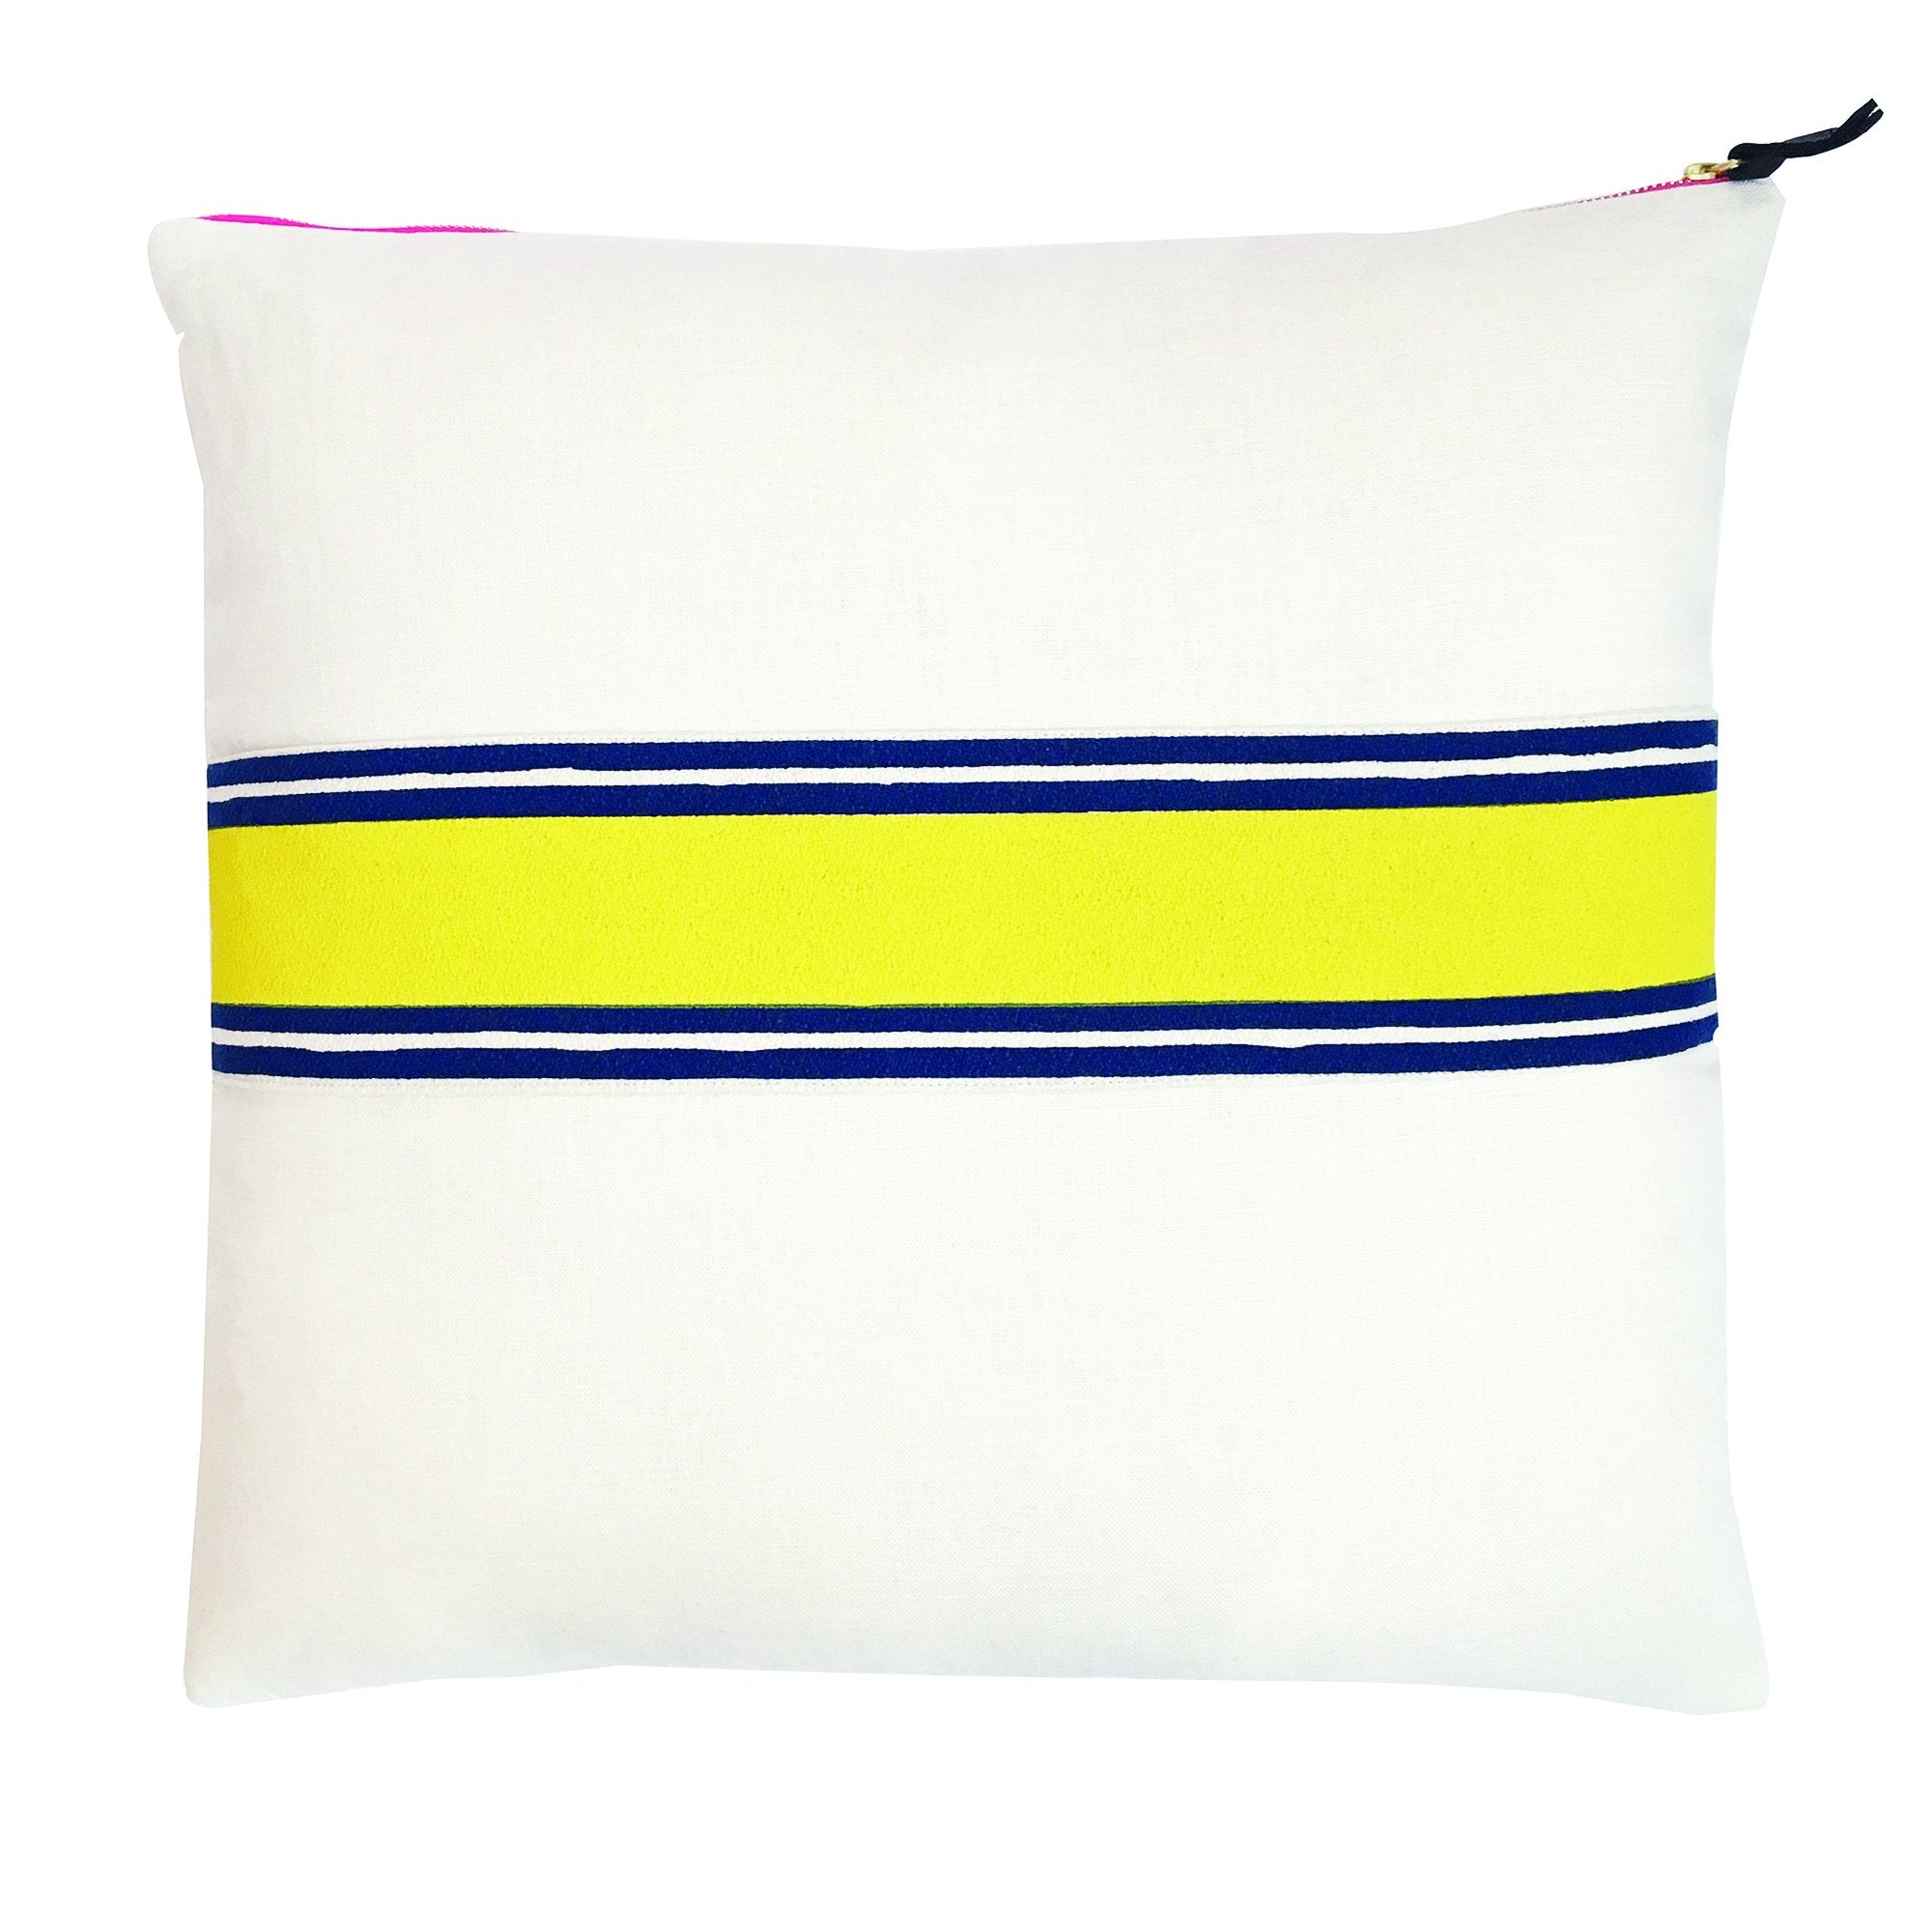 LEMON + NAVY TWO COLOR BAND ON OYSTER LINEN PILLOW